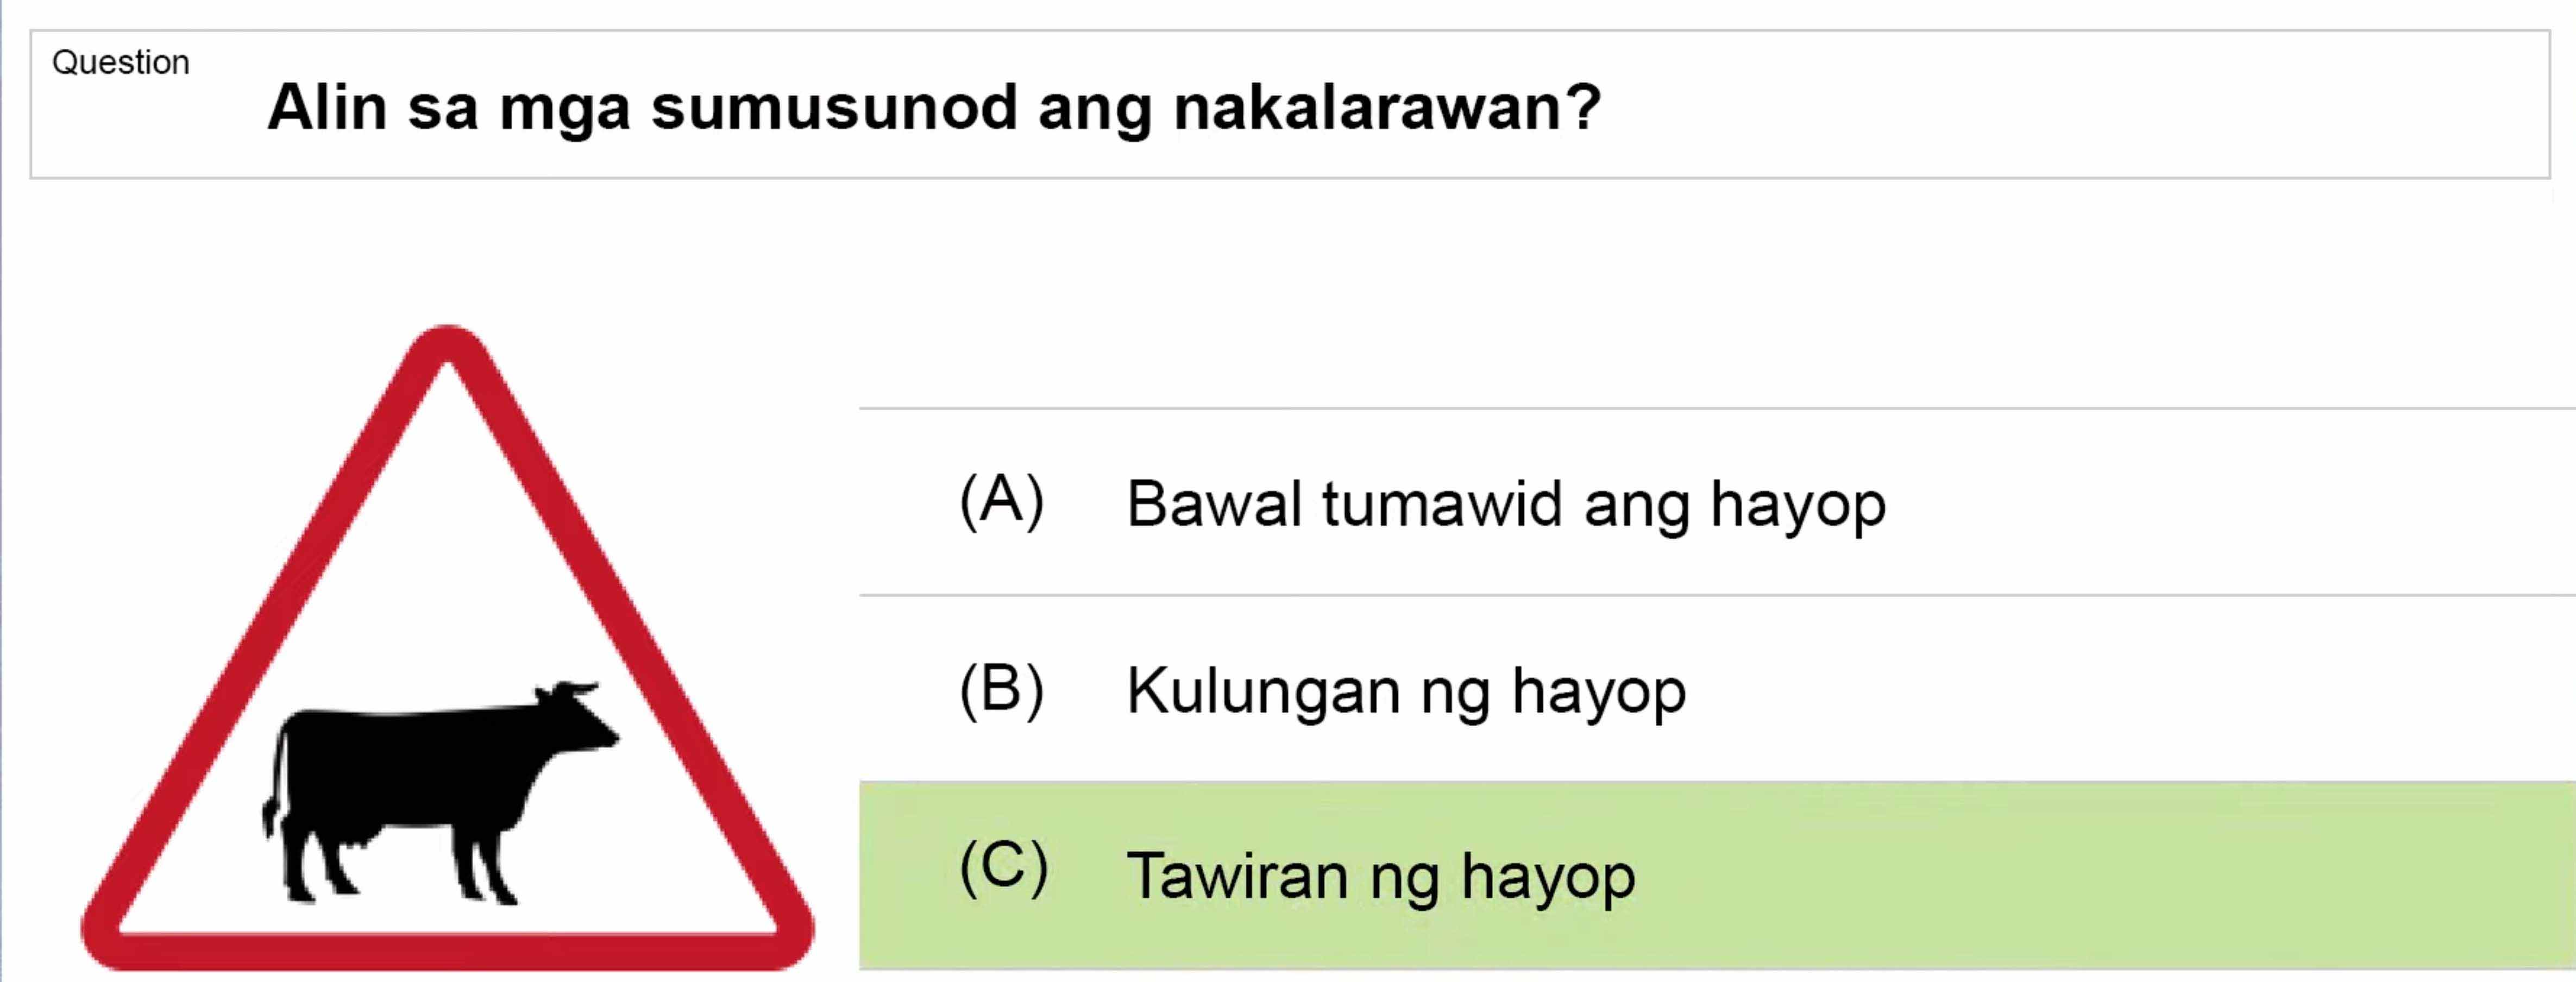 LTO Tagalog non professional exam reviewer motorcycle 2 (39)